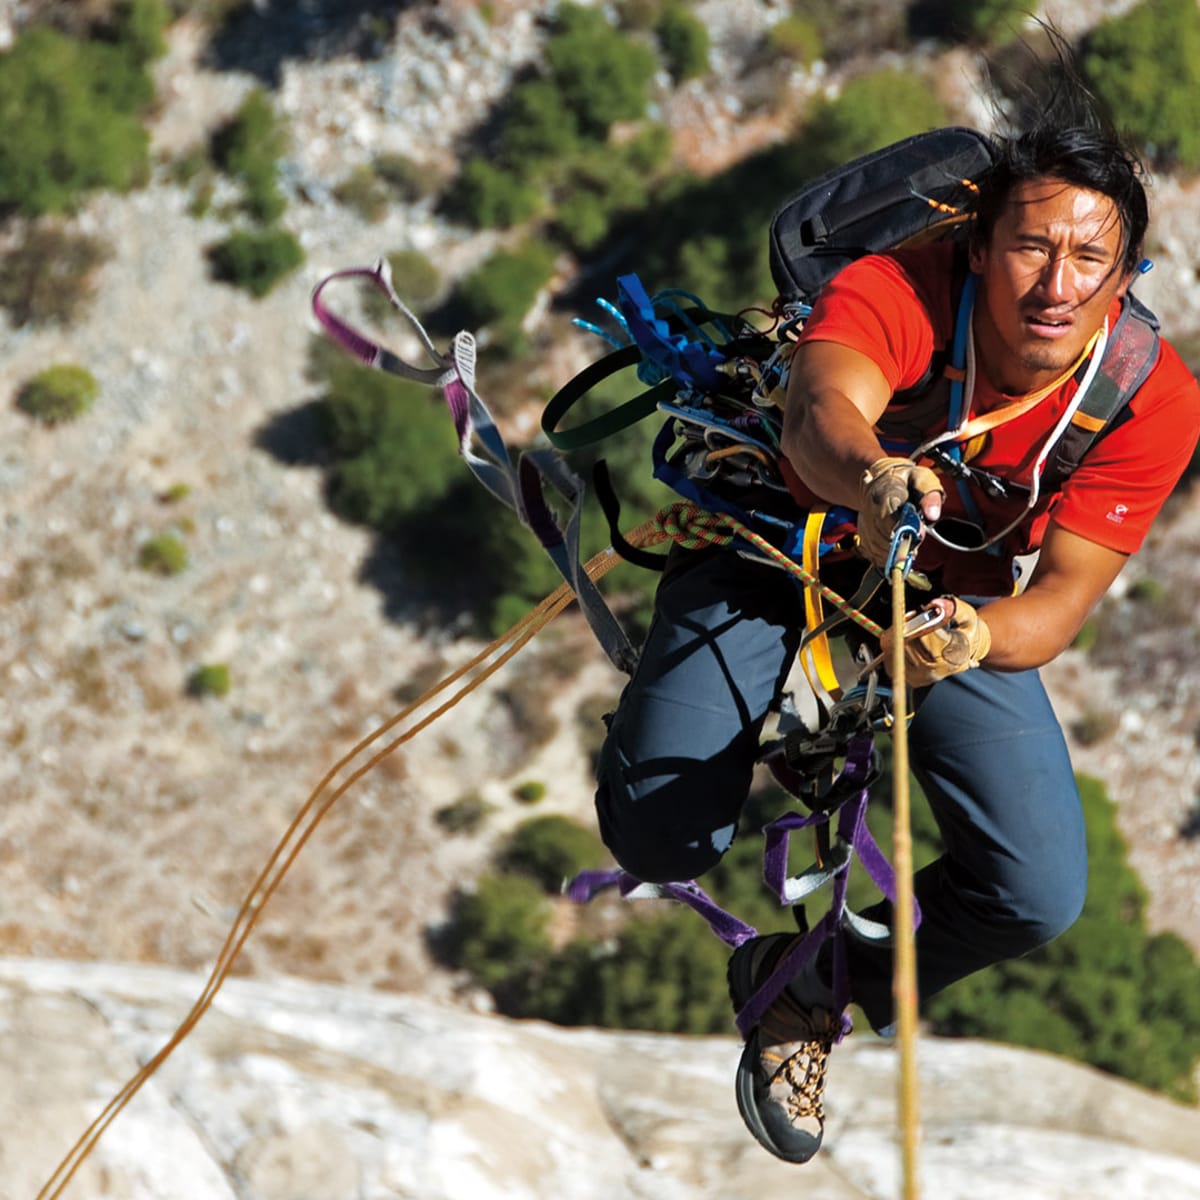 From solo climbing to cave diving: The most extreme sports in the